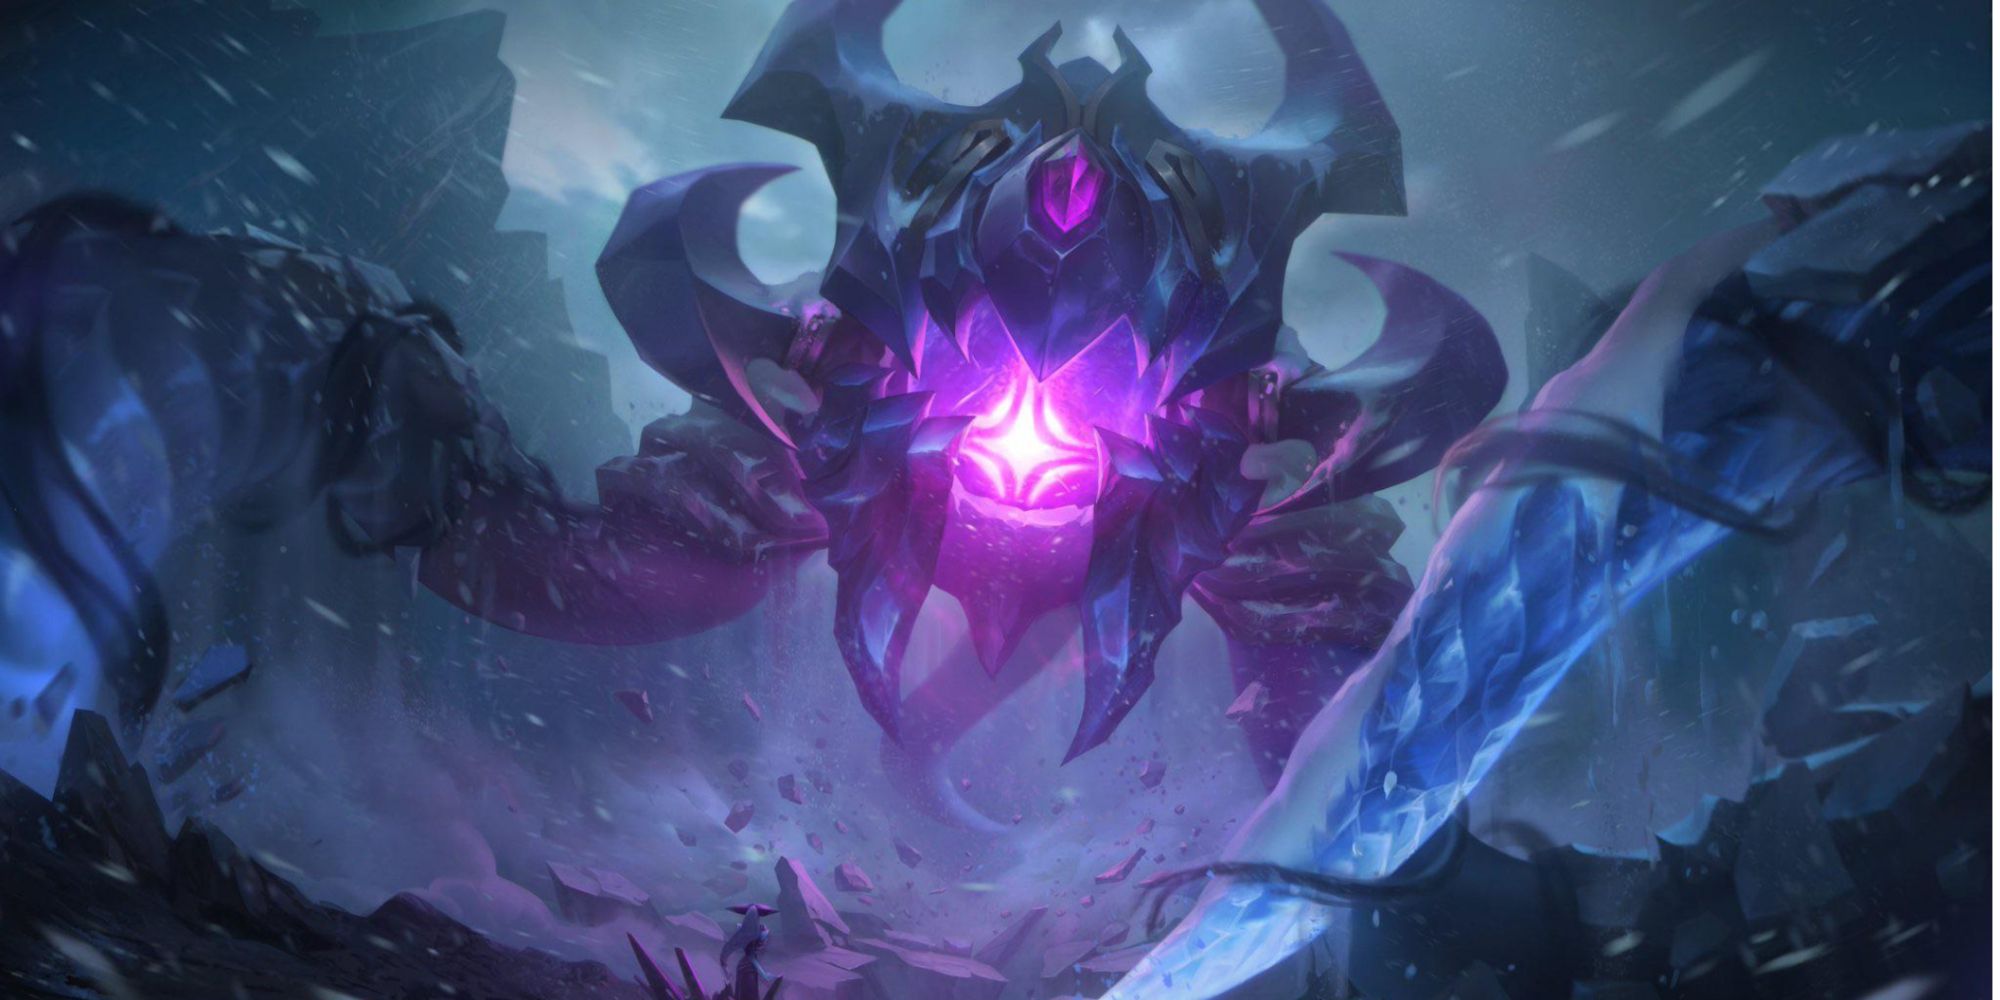 Black frost Vel'Koz stares with his cold purple eye as his tentacles lurk within view, the cold Freljord winter around